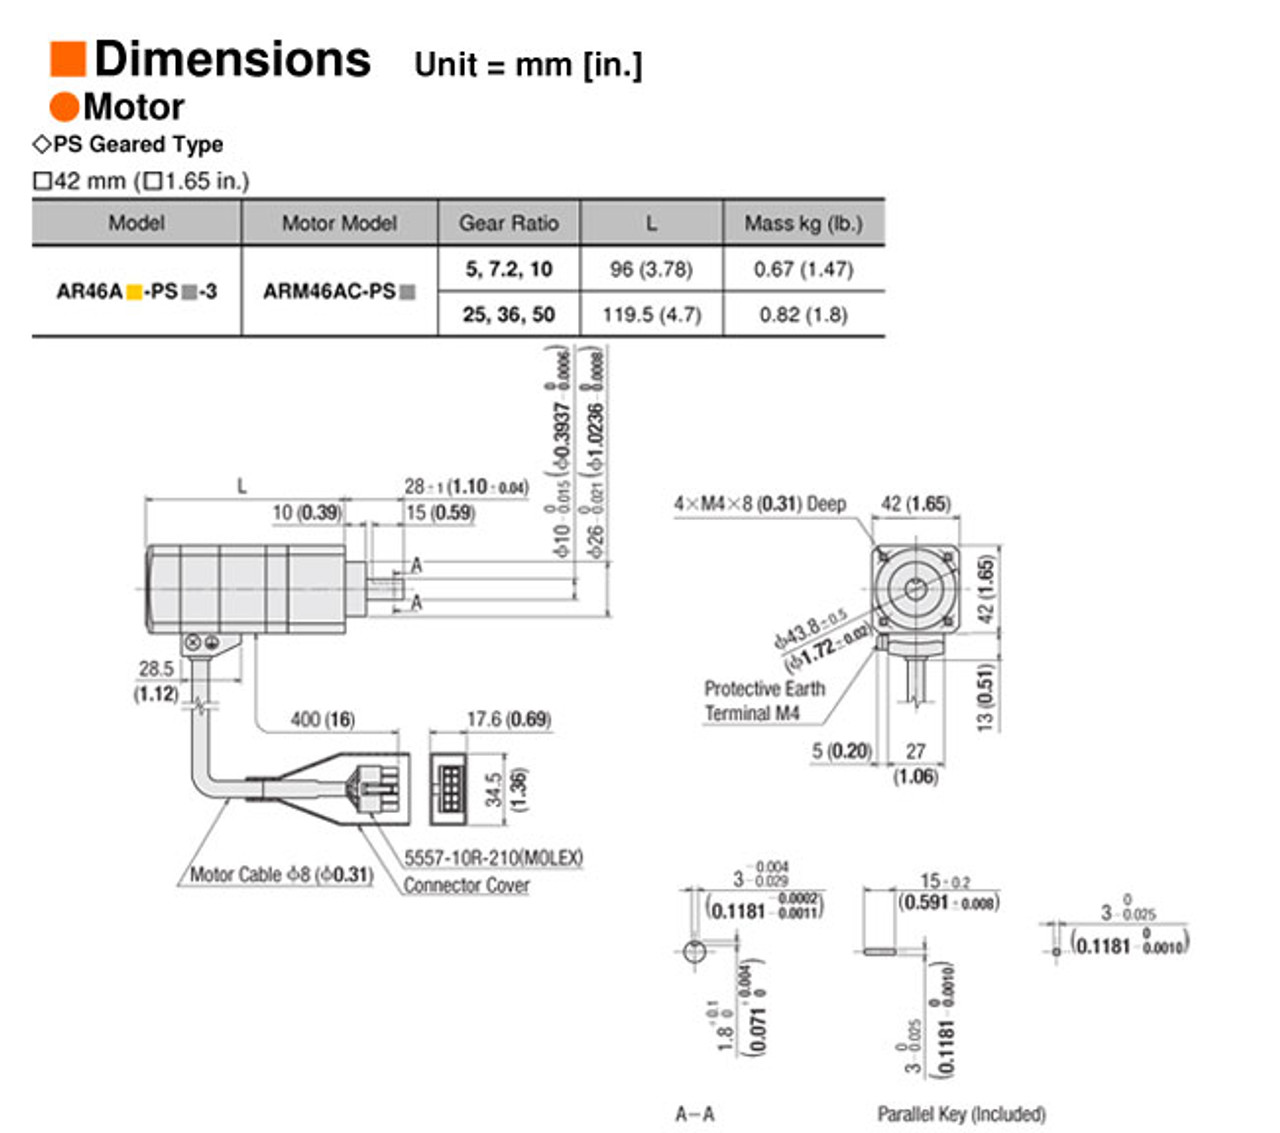 AR46AS-PS25-3 - Dimensions